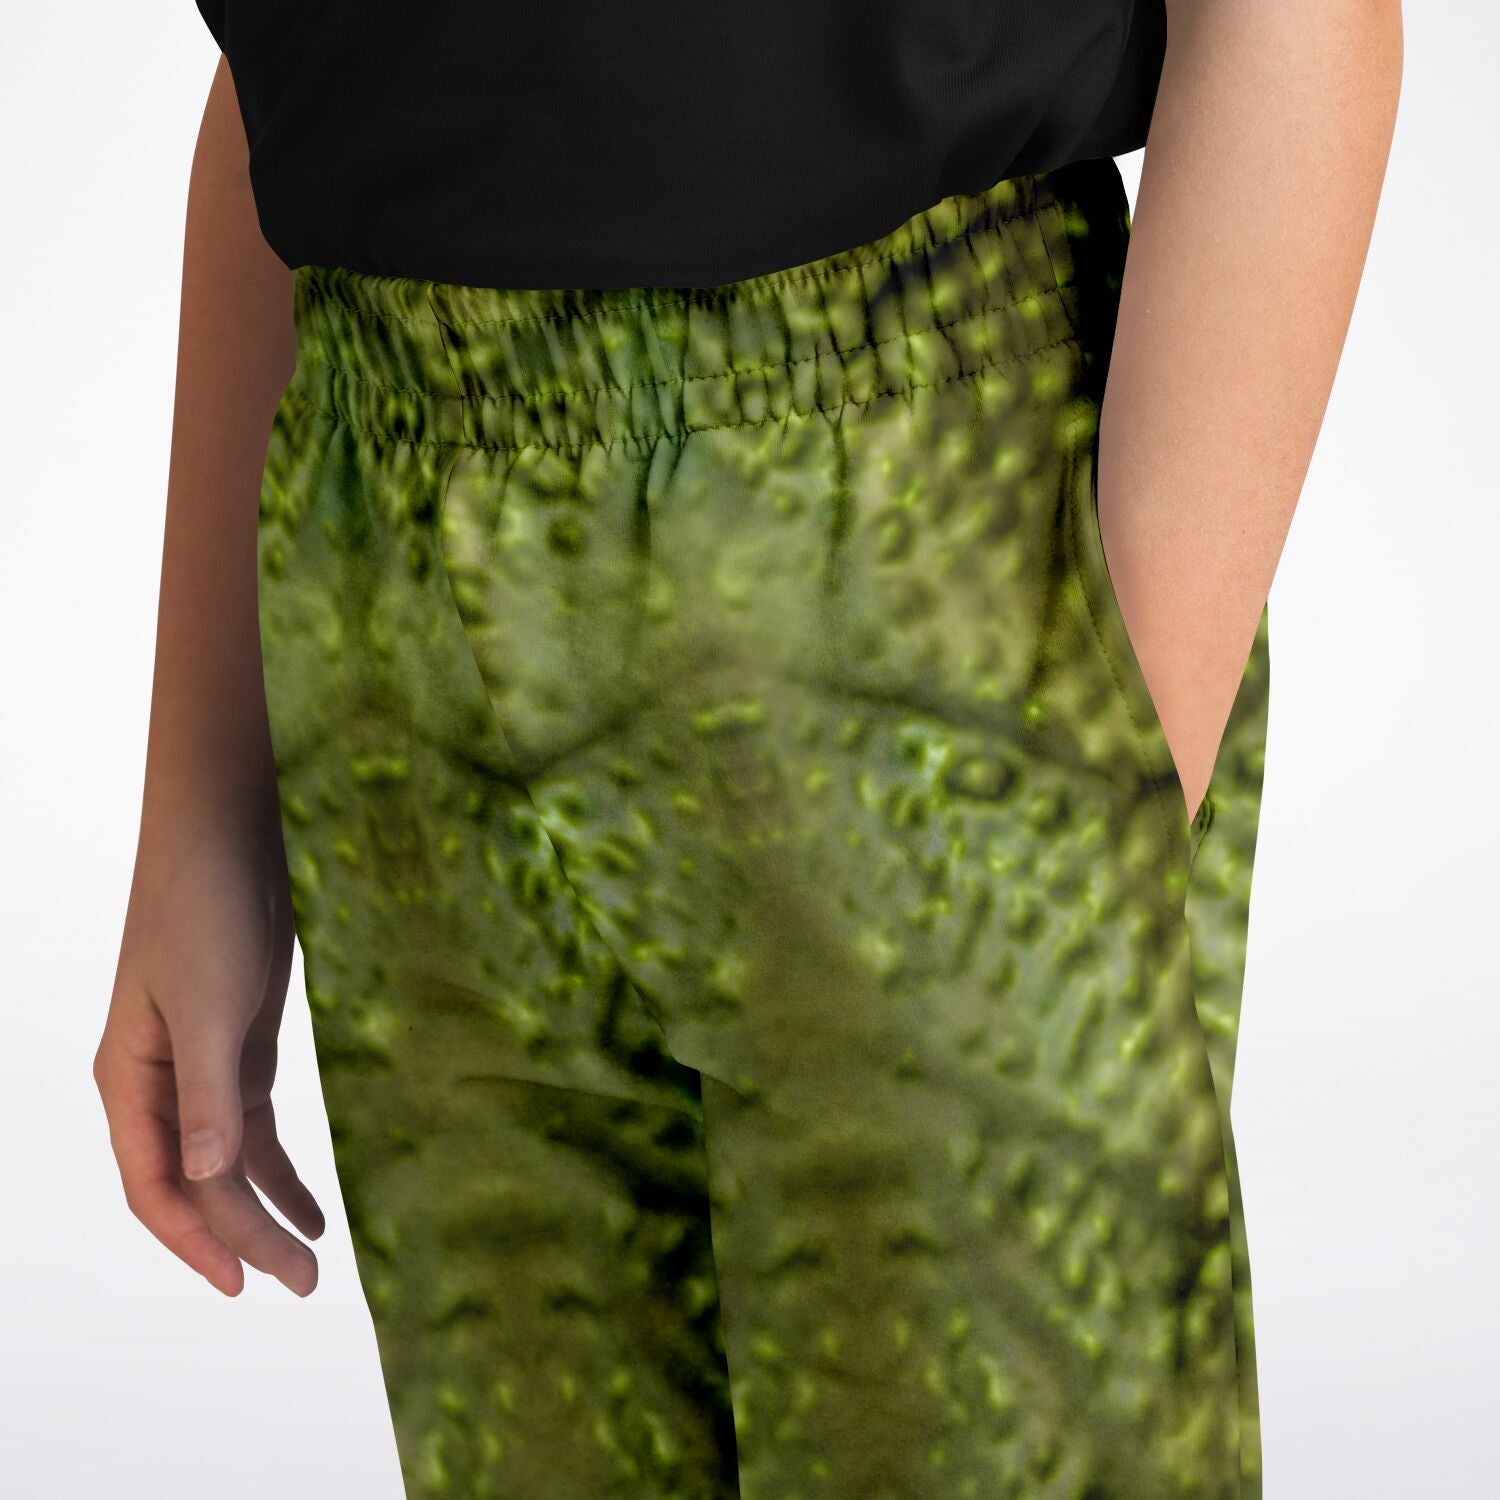 Creature From The Black Lagoon Inspired Kids' Joggers